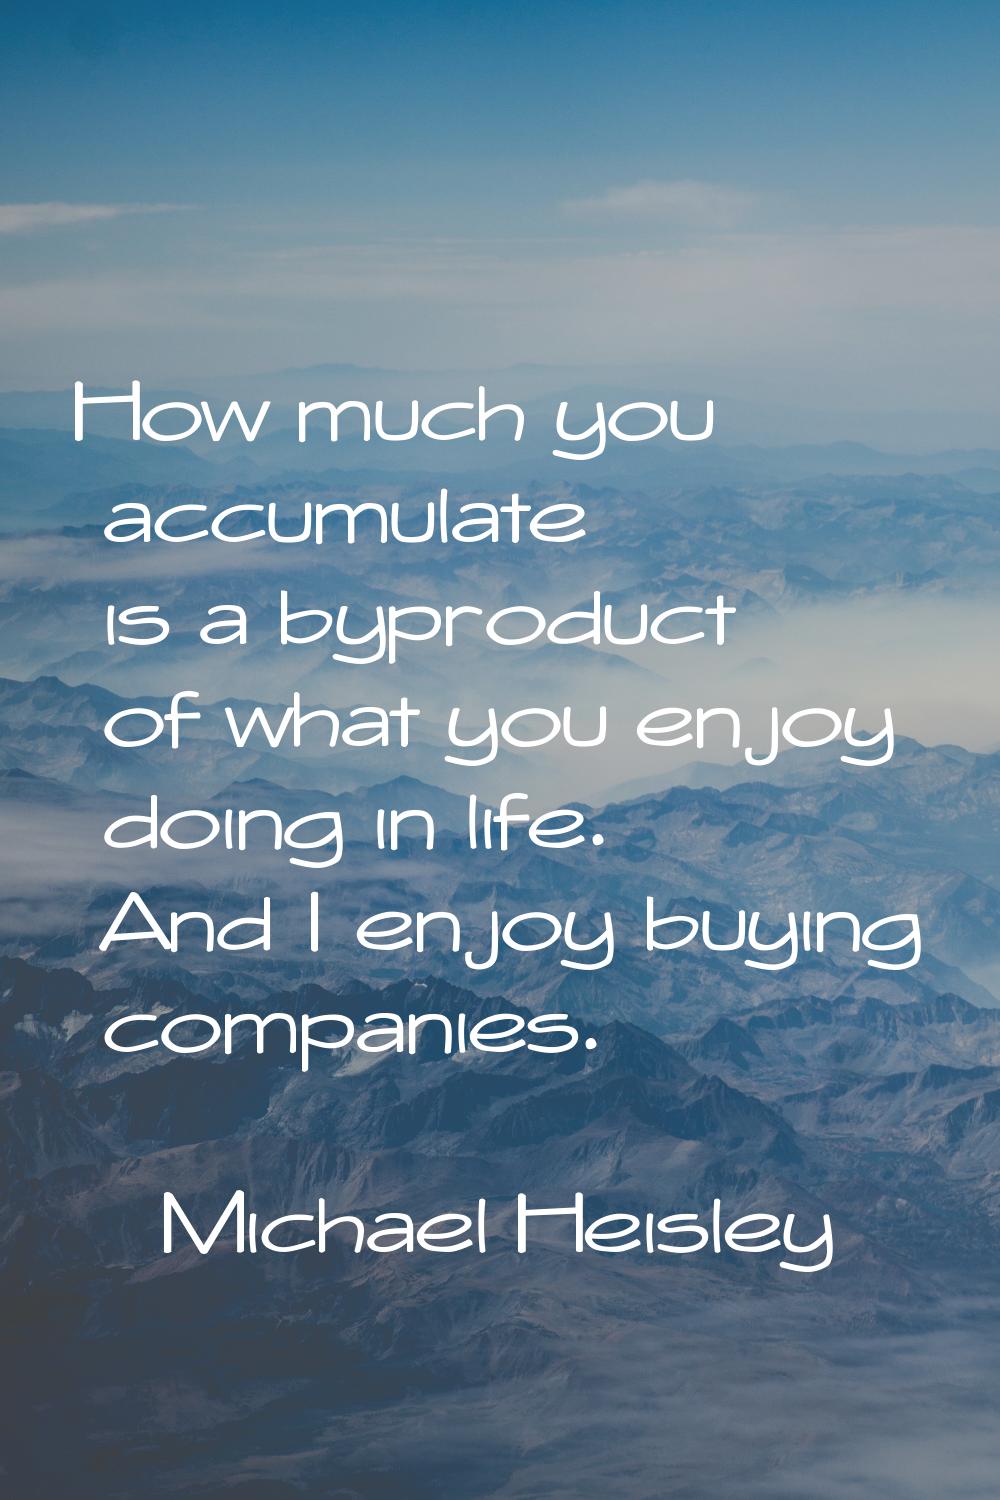 How much you accumulate is a byproduct of what you enjoy doing in life. And I enjoy buying companie